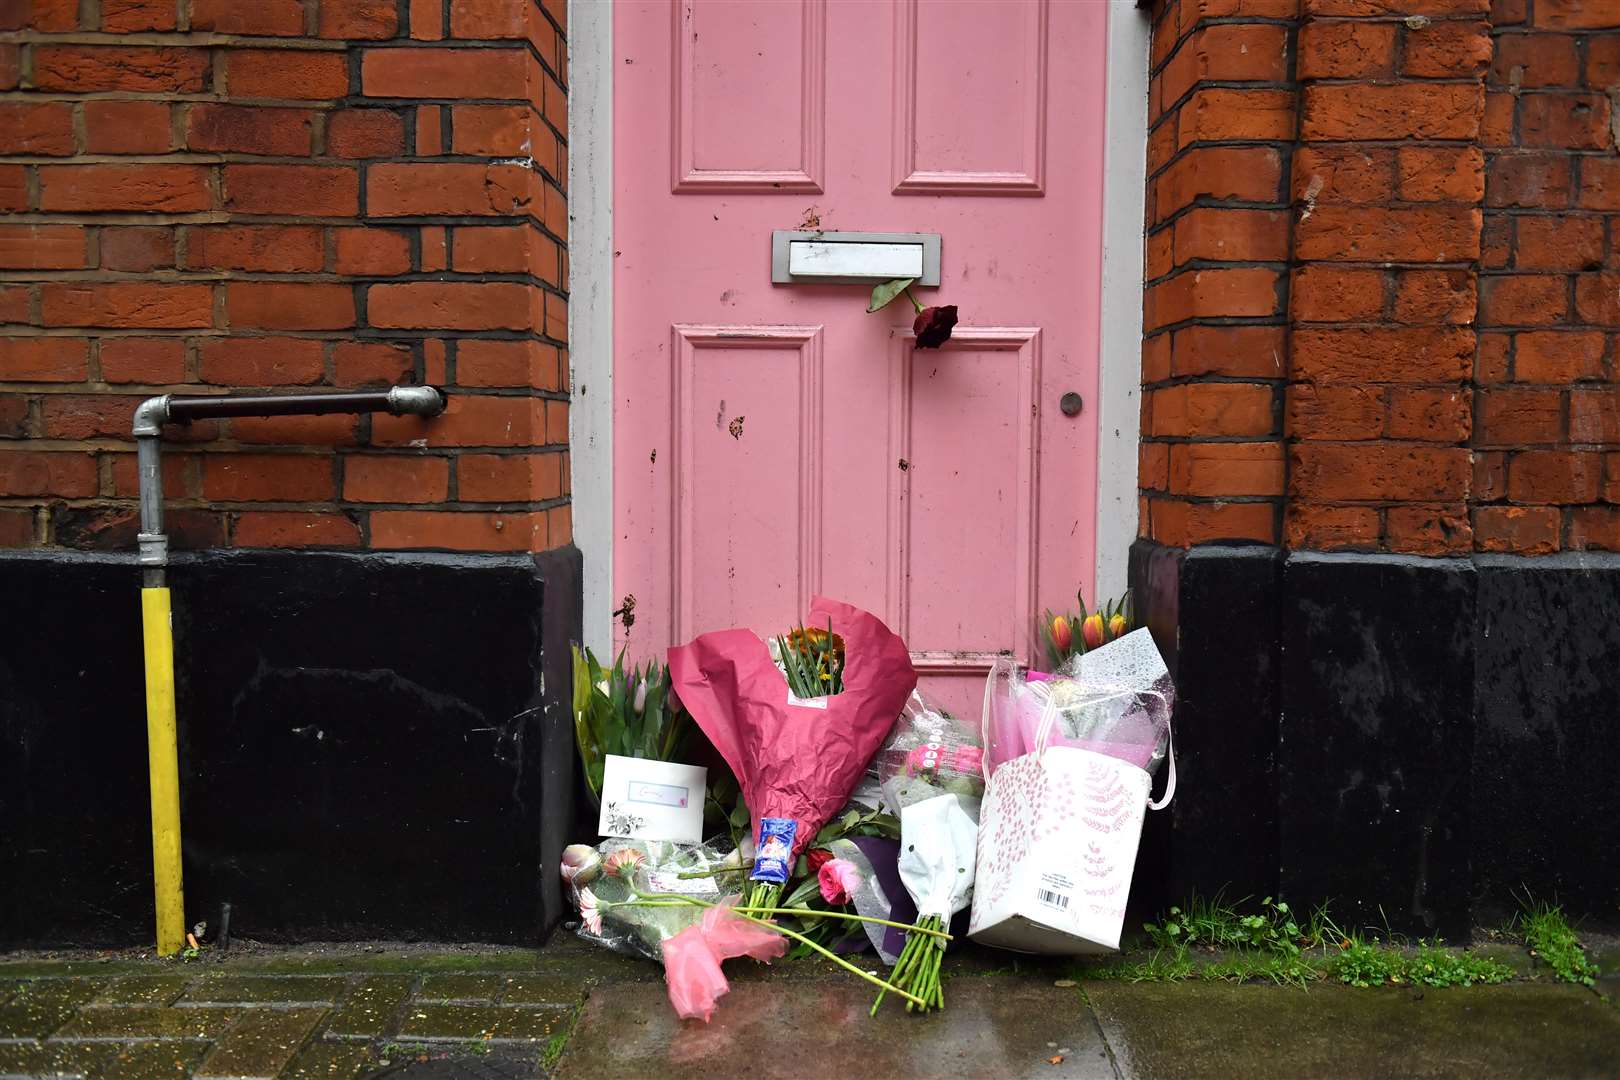 Floral tributes placed outside Caroline Flack’s former home in North London (Dominic Lipinski/PA)